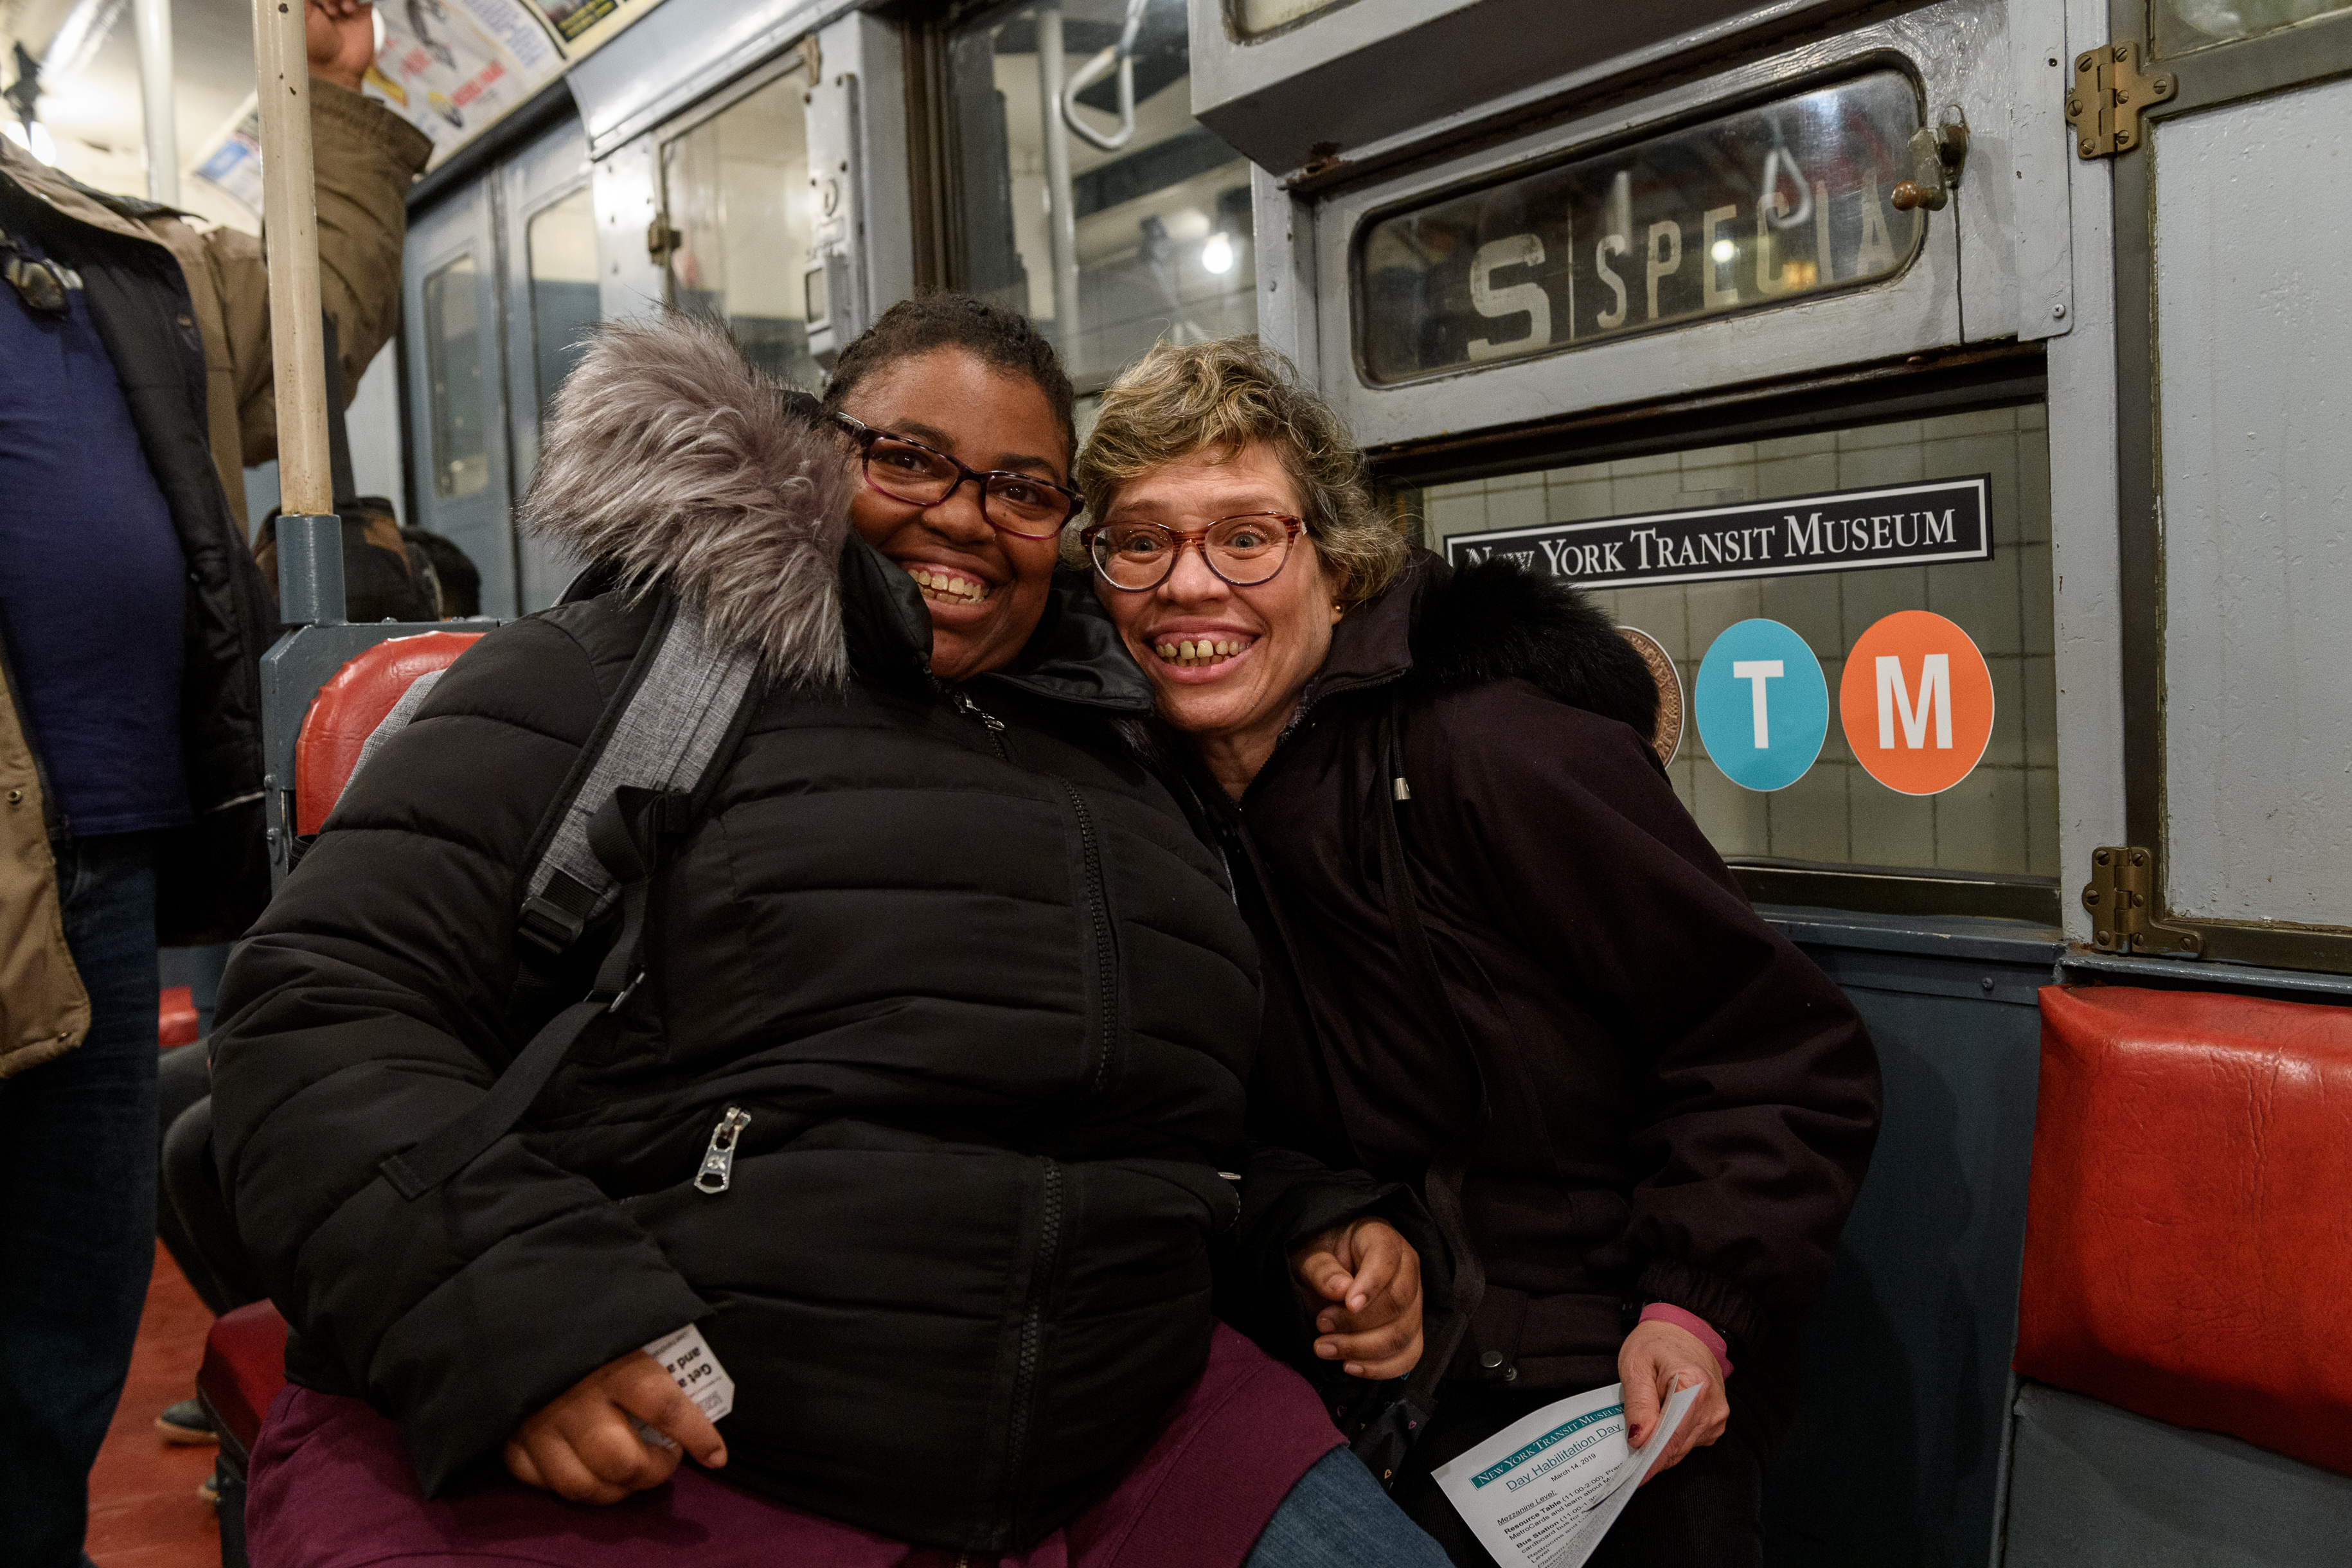 Two women sit close together with big smiles on a subway car.